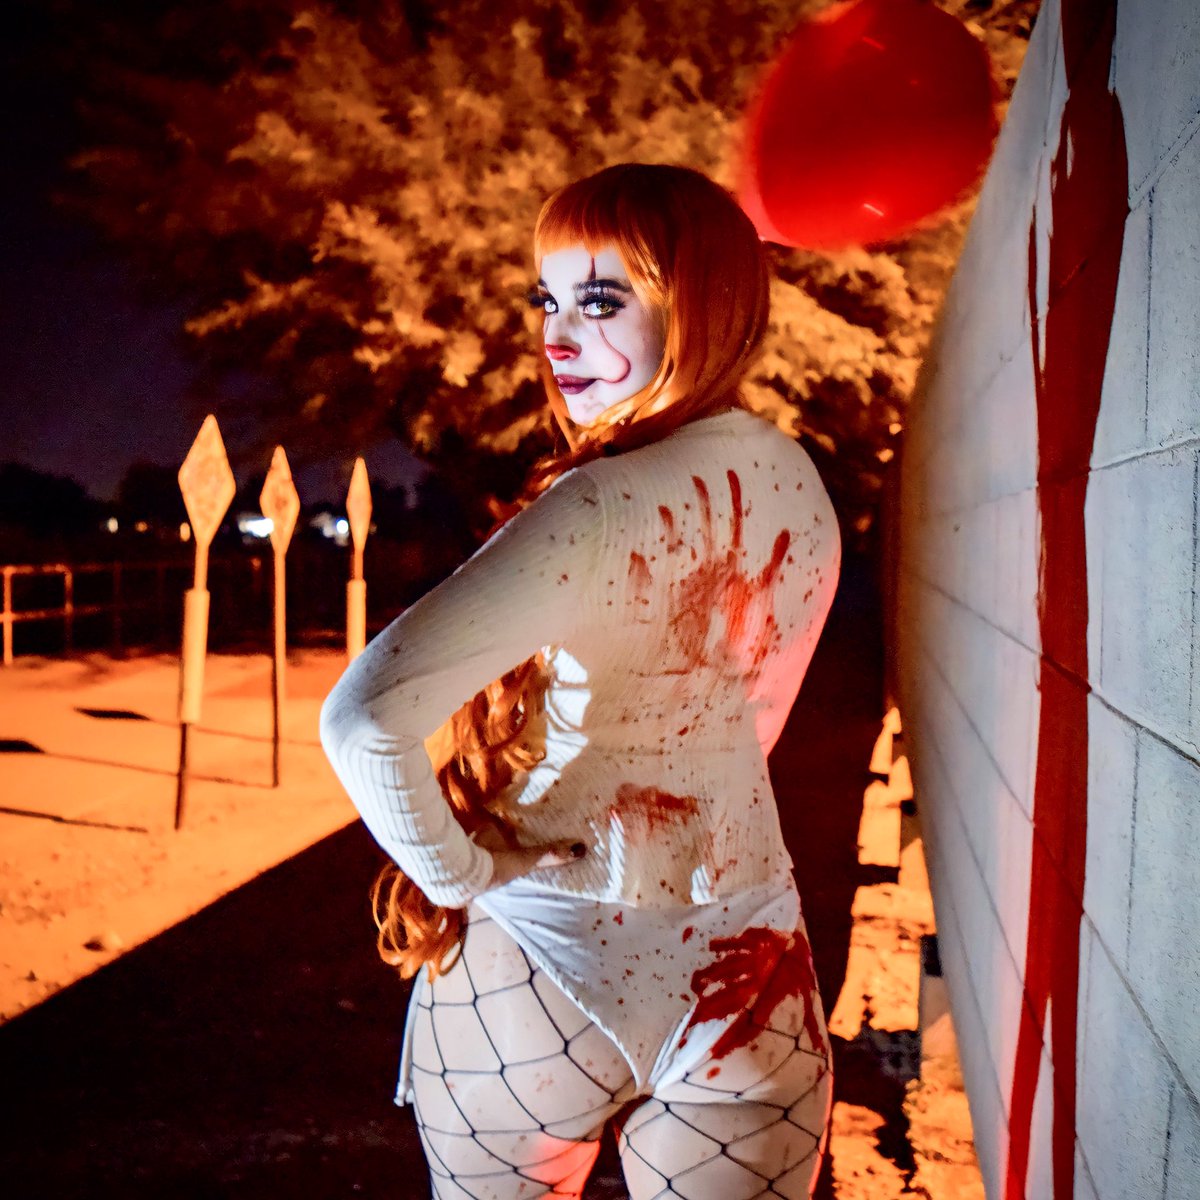 Watching some spookies before bed, probably not the best idea but 😈
Photo taken by @windows_vinsta 
.
.
#pennywise #pennywise🎈 #pennywisecosplay #weallfloatdownhere #it #cosplay #horror #horrorcosplay #cosplaygirl #polyxenacosplay